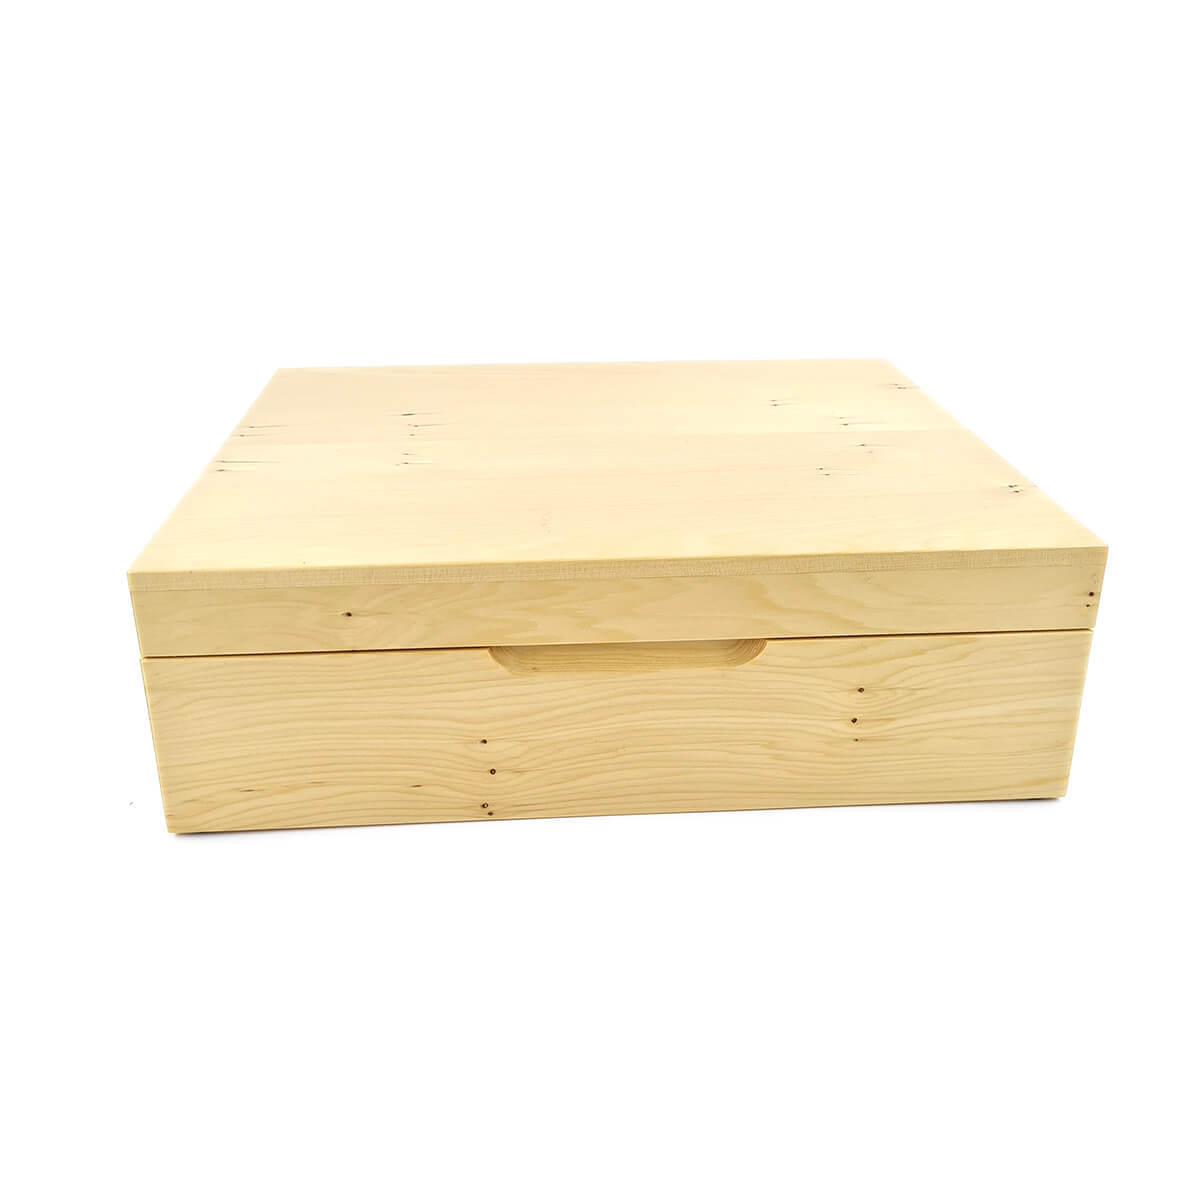 Tasmanian Huon Pine Jewel Box Fitted With Half Tray - Pink Lining Large View